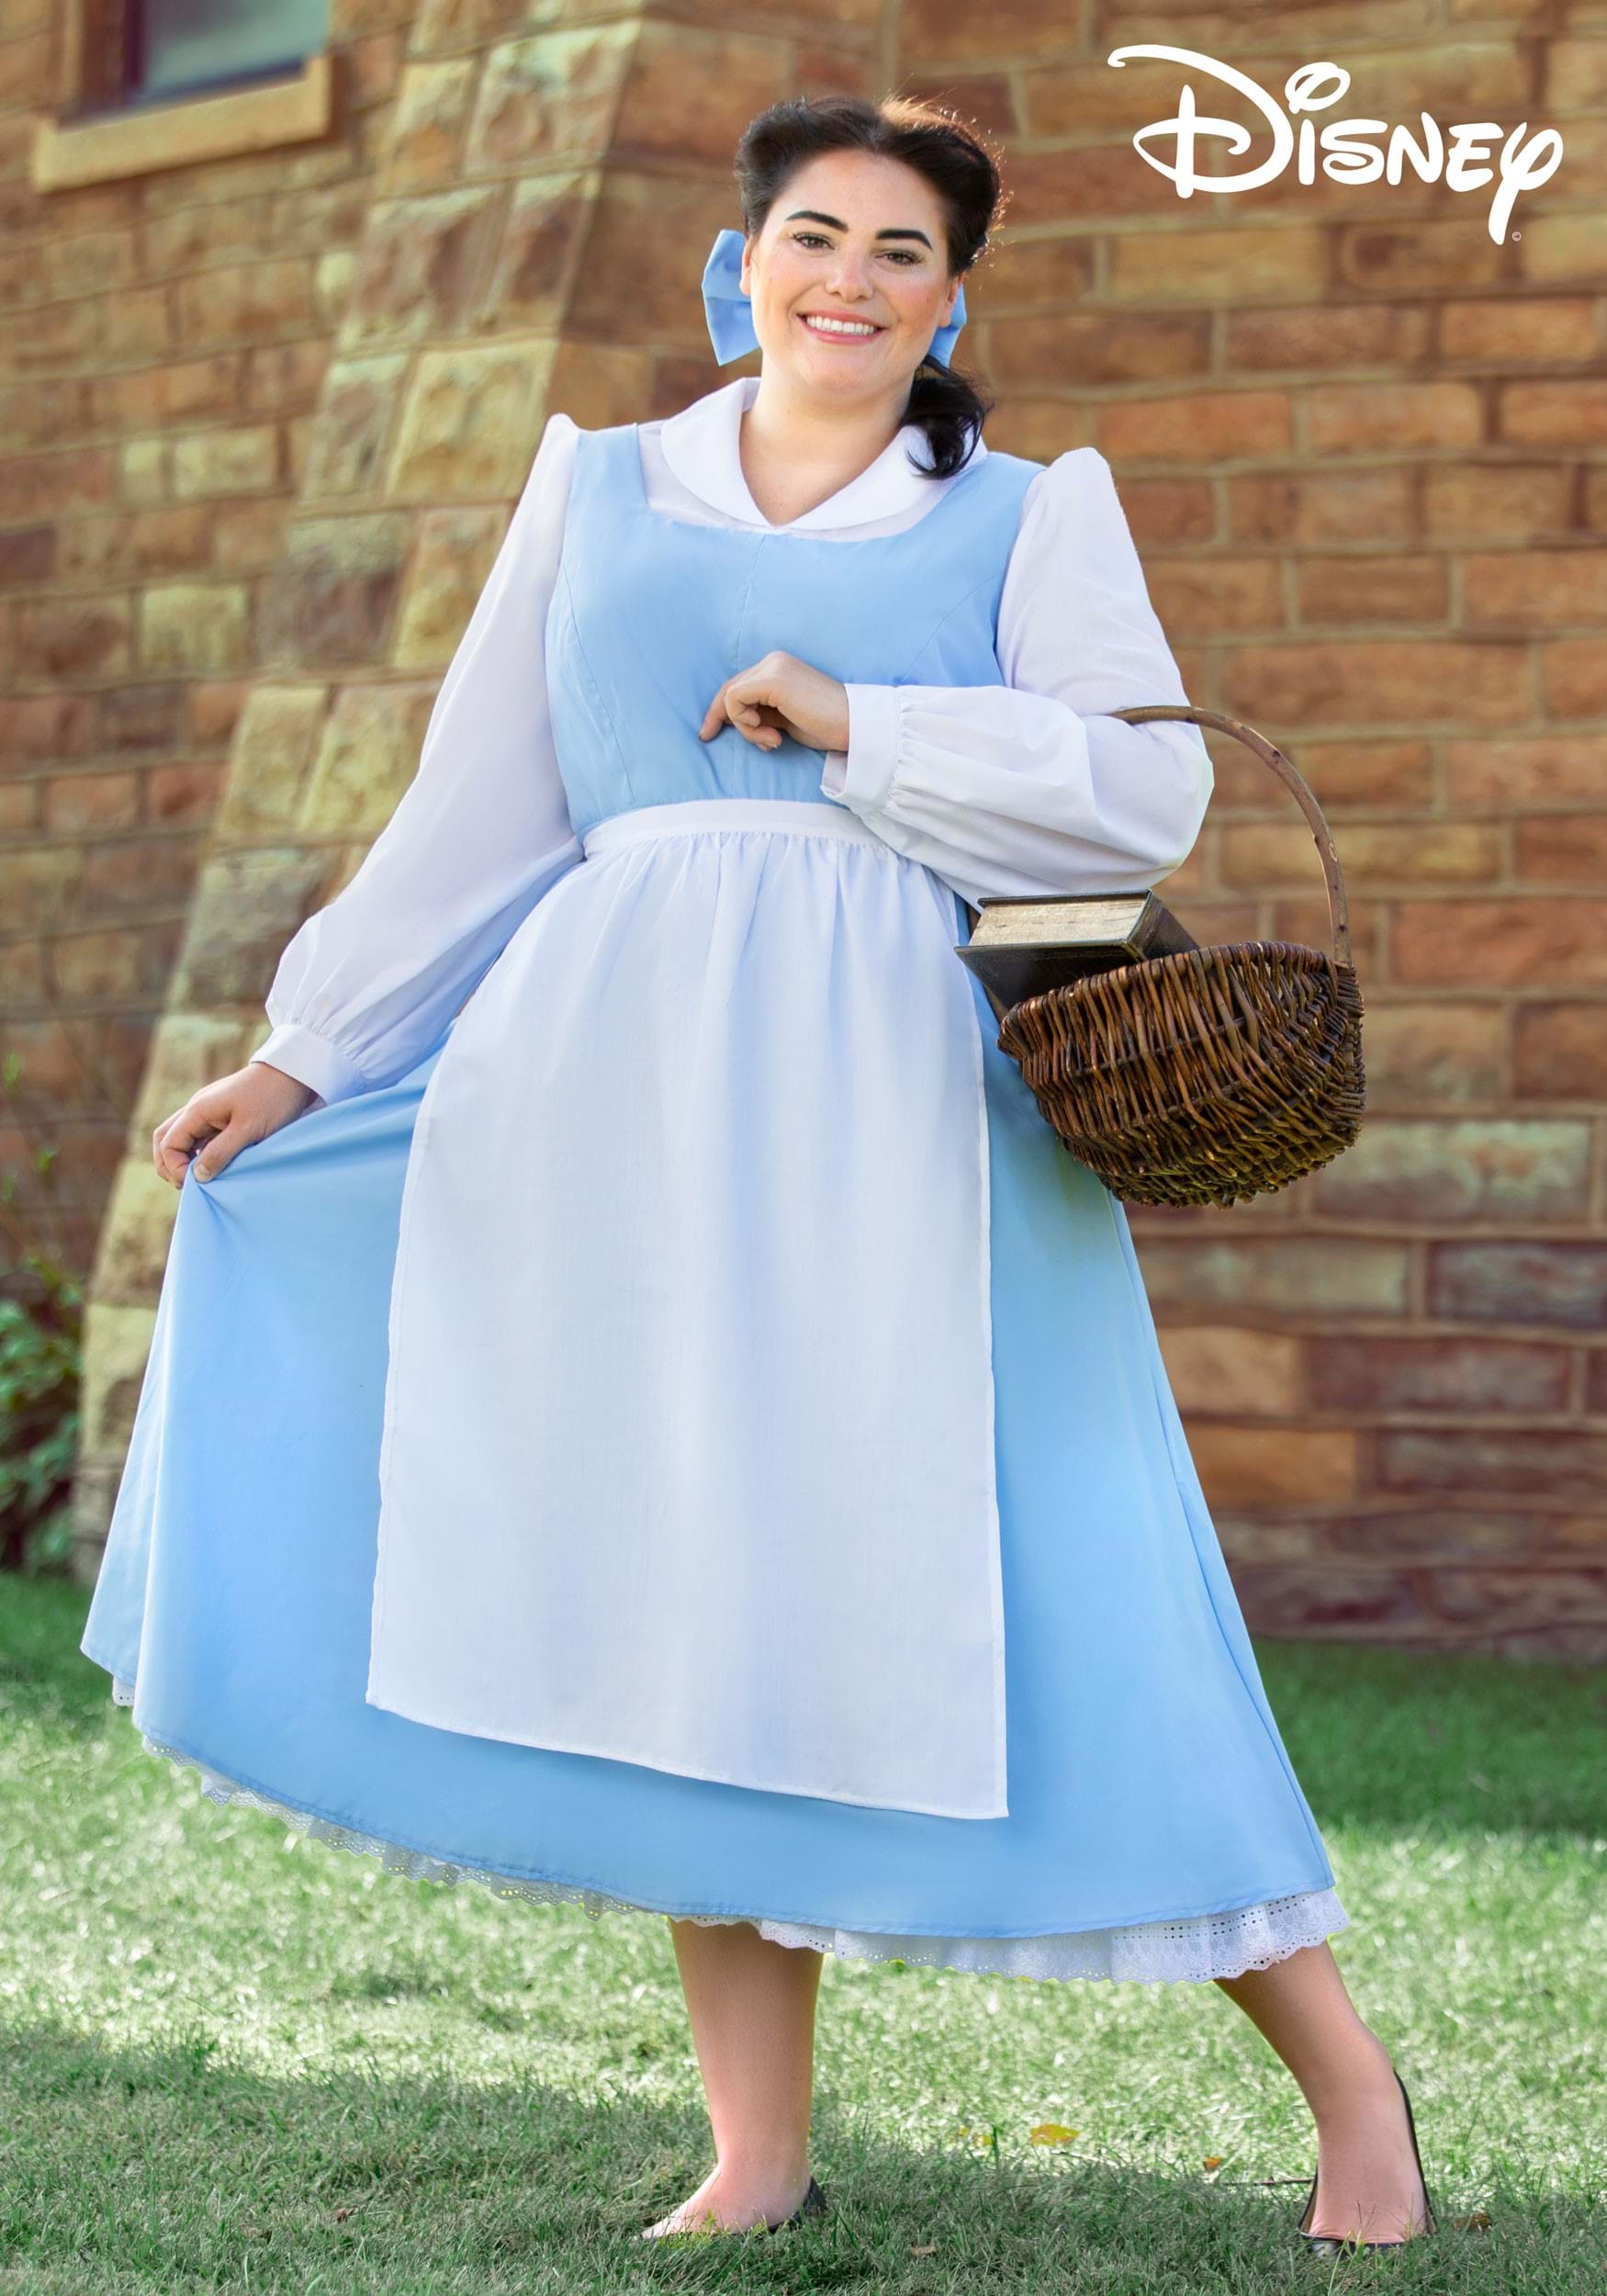 https://images.fun.com/products/70385/1-1/plus-size-beauty-and-the-beast-belle-blue-dress-costume-2.jpg